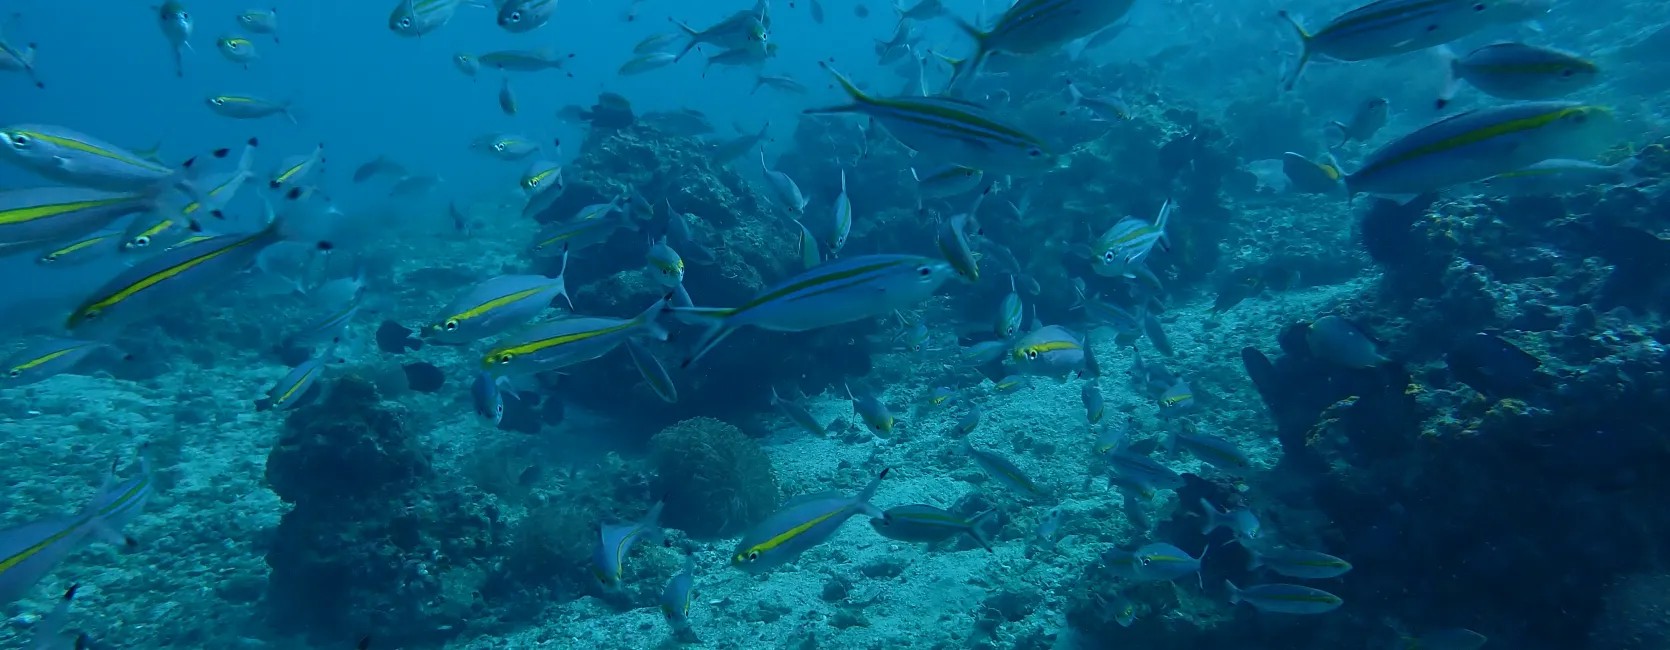 School of unidentified fish swimming in a reef.